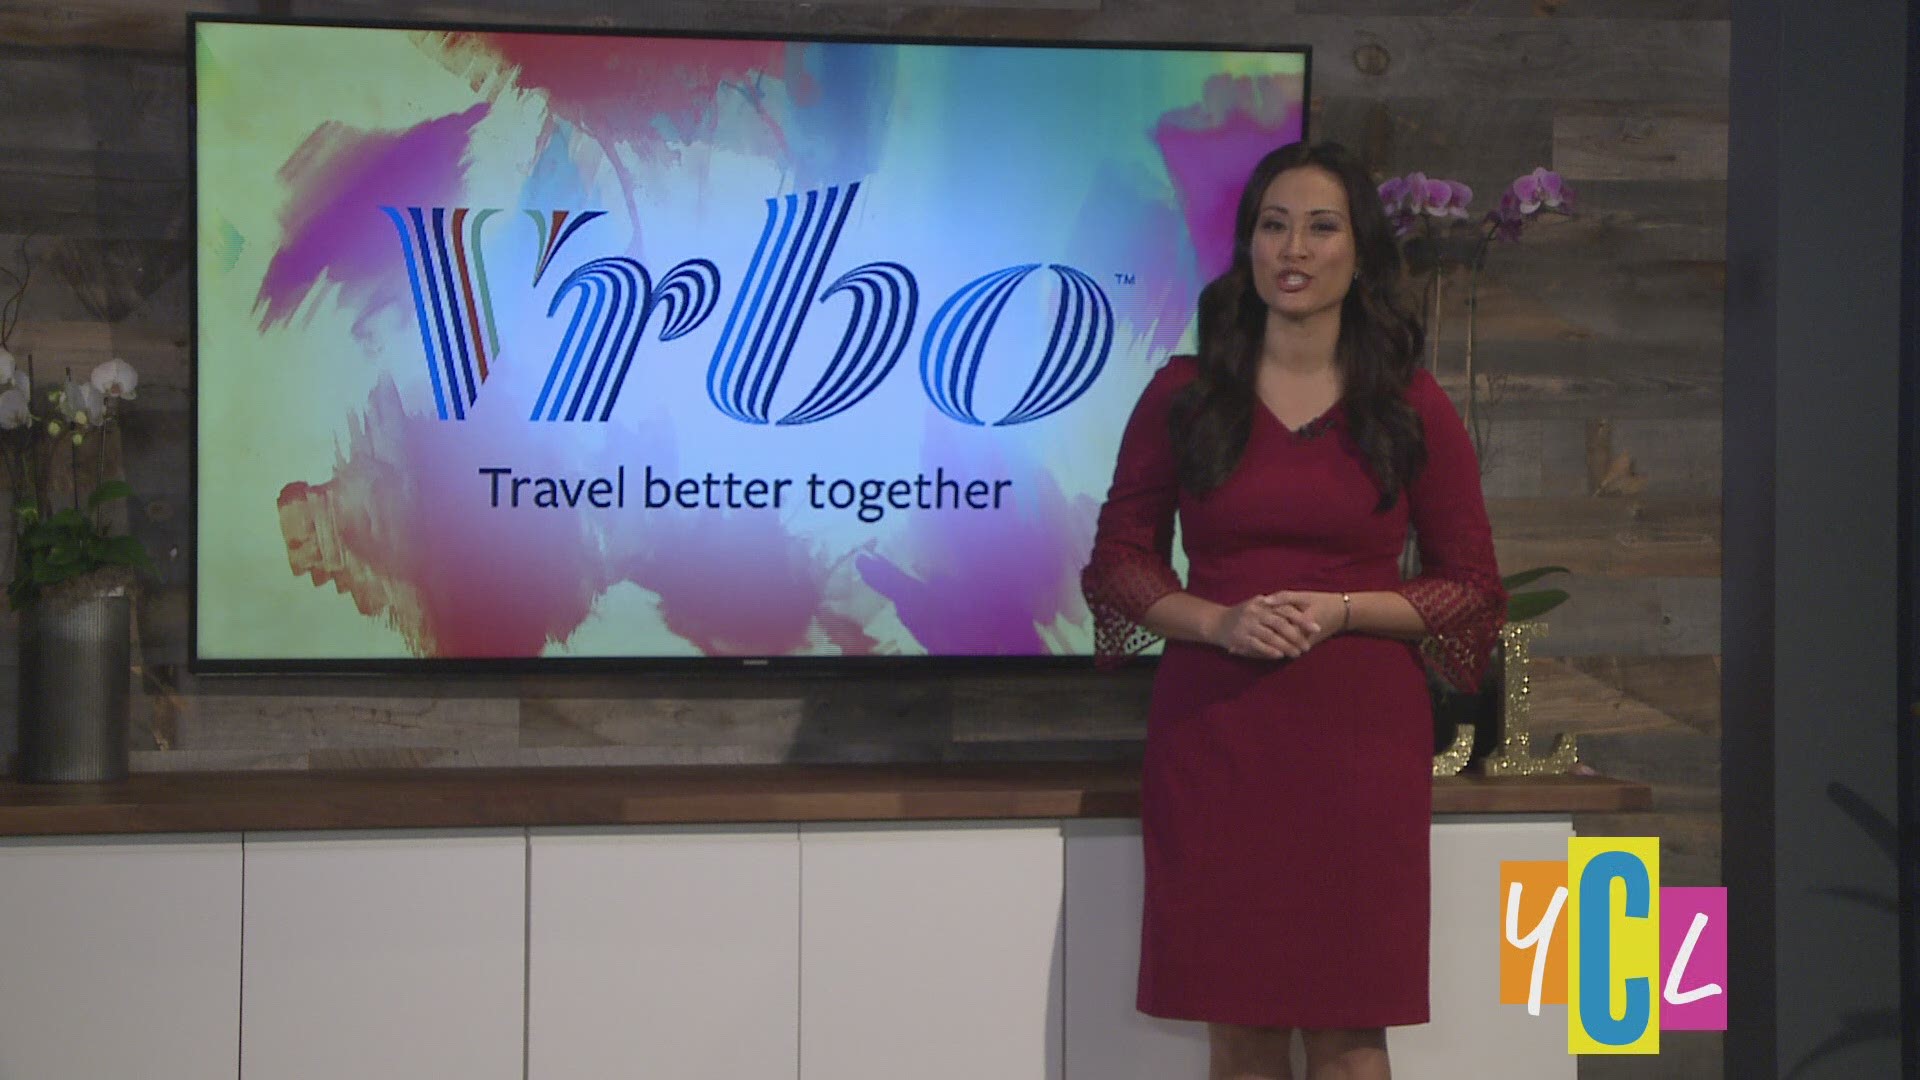 Vrbo Family Travel Expert Melanie Fish shares top up-and-coming destinations you should consider for your next getaway, and Vrbo is giving away a family getaway!